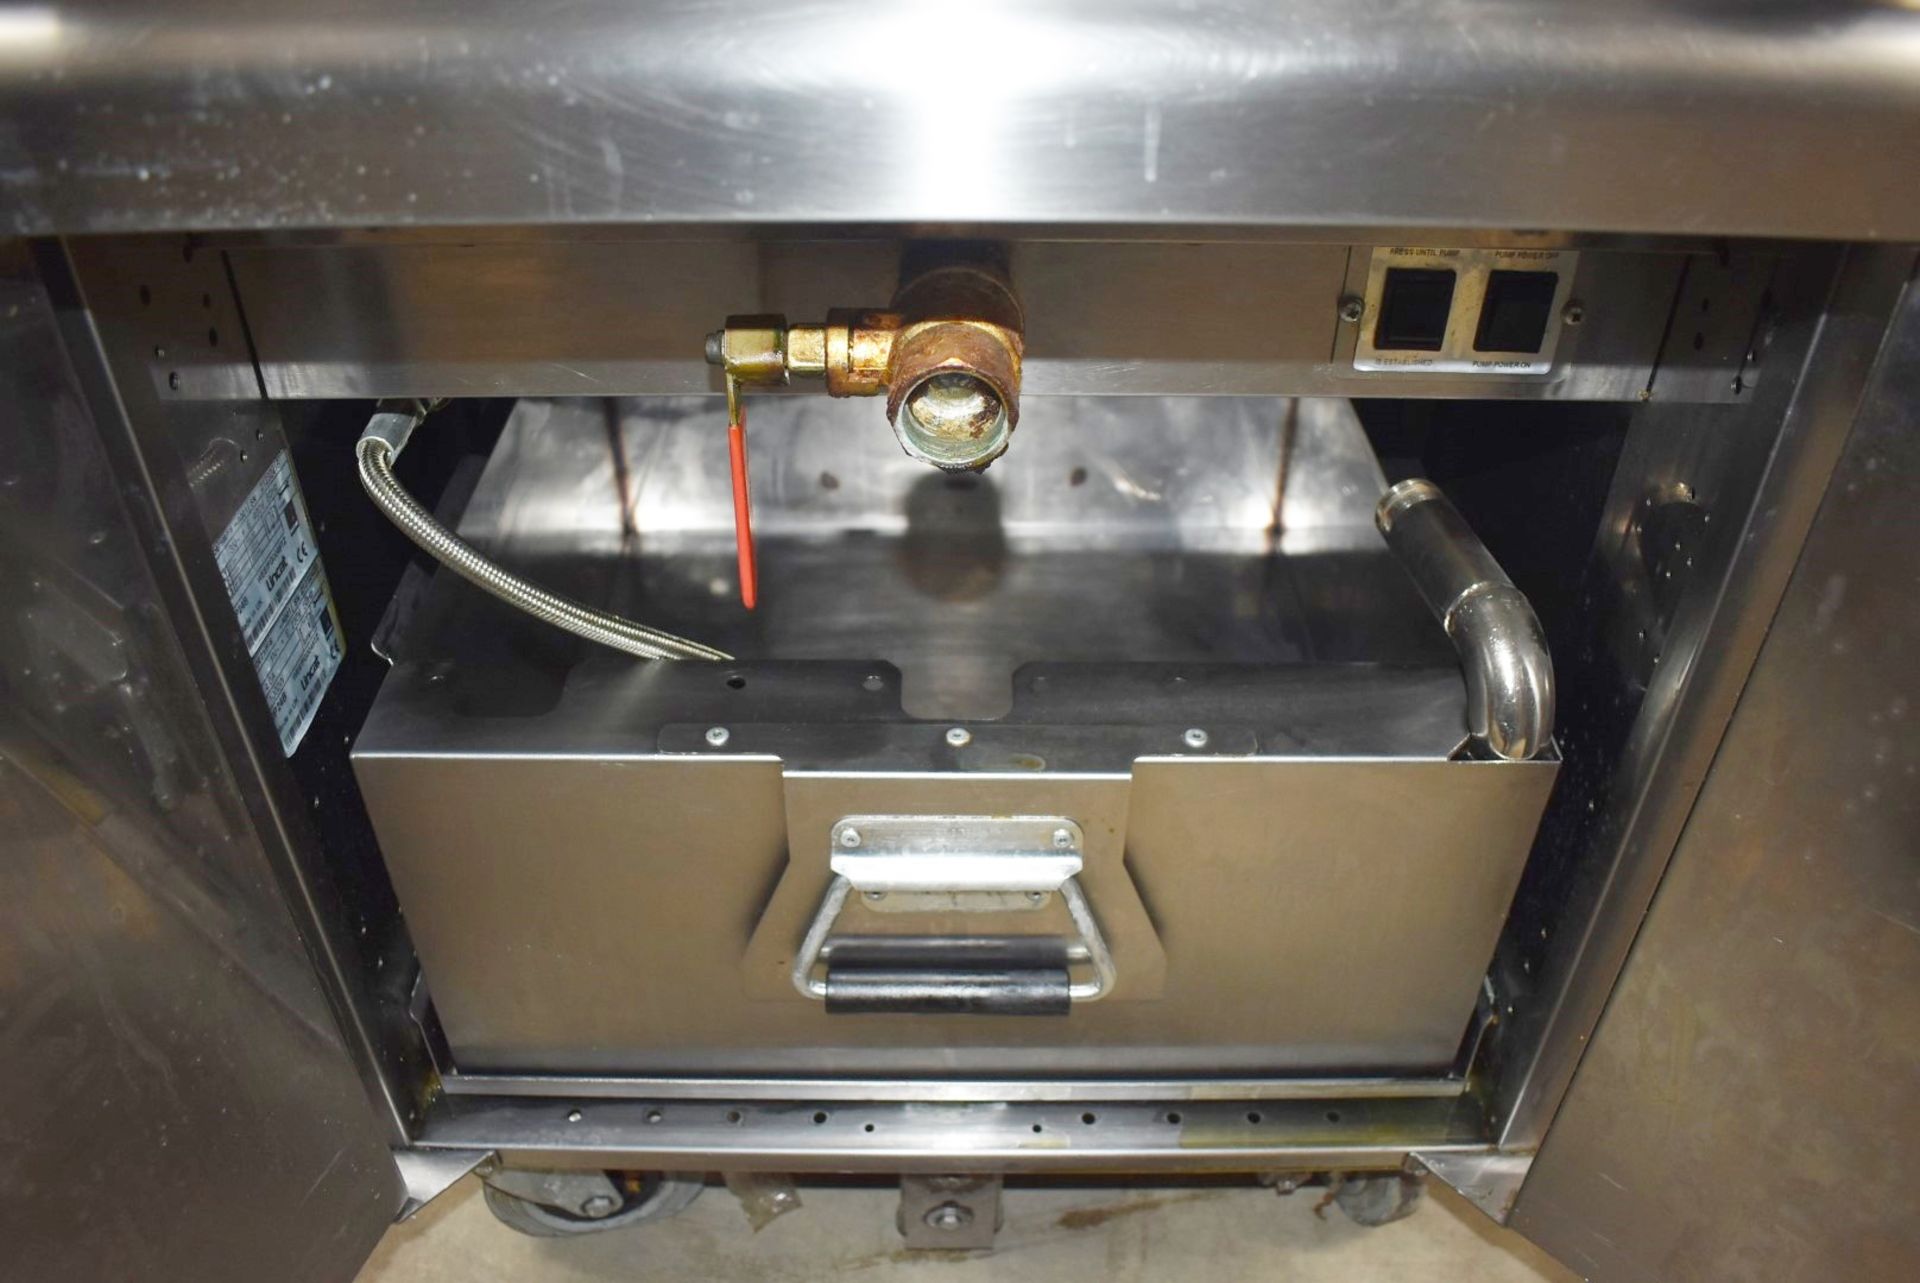 1 x Lincat Opus 700 Single Tank Electric Fryer With Built In Filtration - 3 Phase - Image 5 of 19